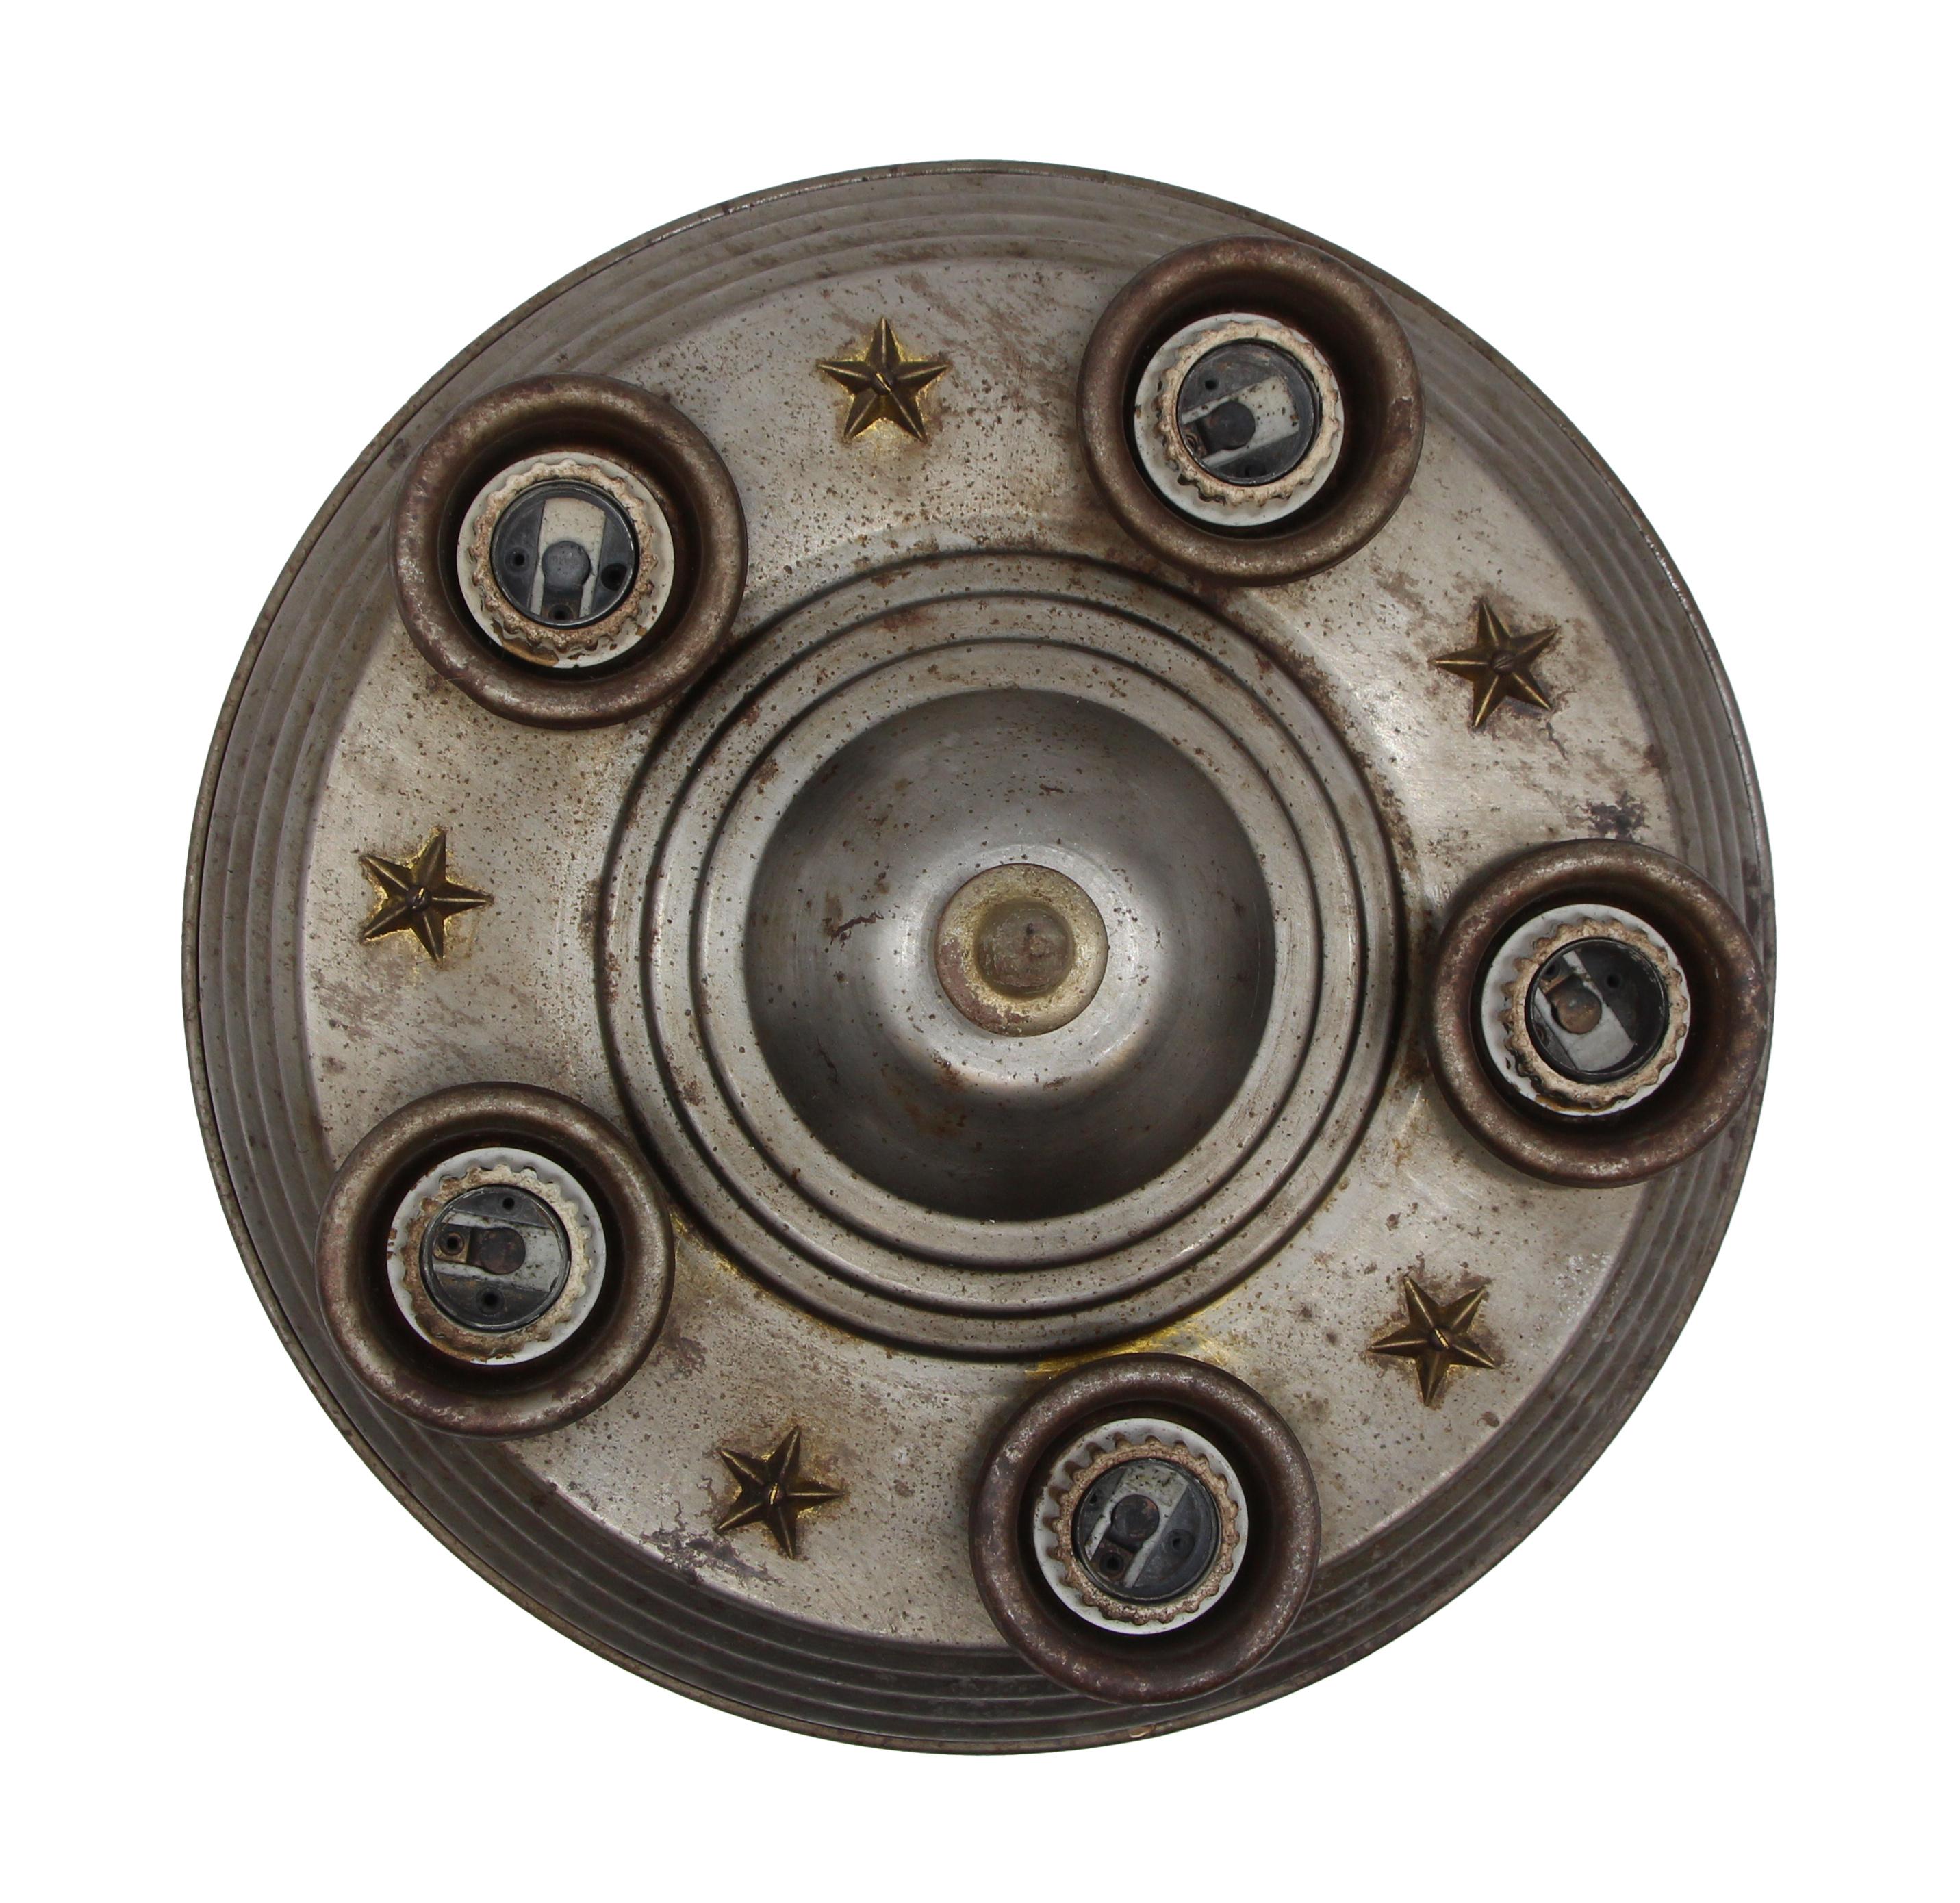 1940's five socket metal ceiling light with brass star accents. This American Classic style light measures 13